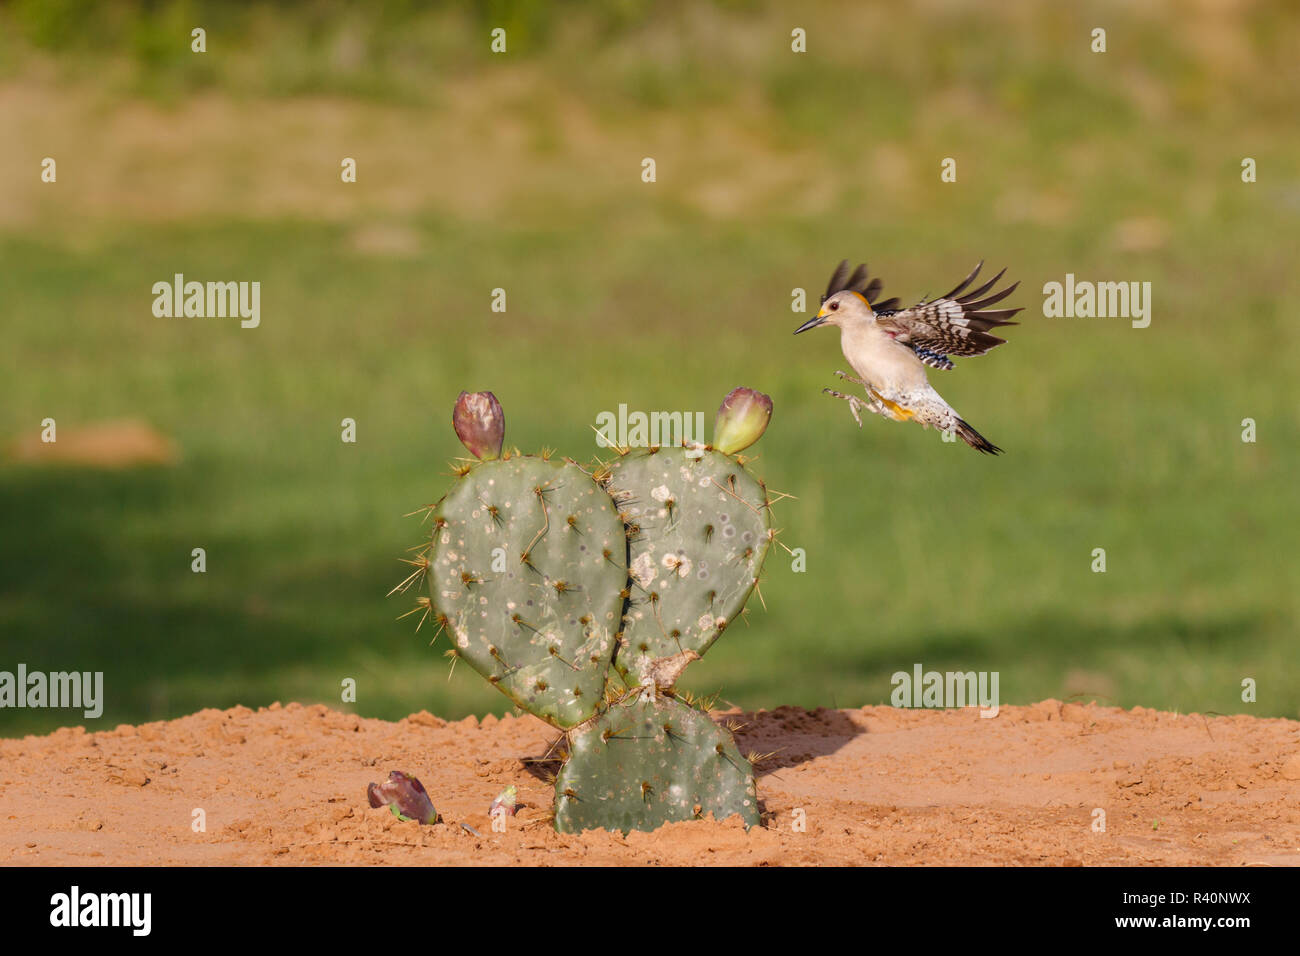 Golden-fronted Woodpecker (Melanerpes aurifrons) landing on prickly pear cactus. Stock Photo